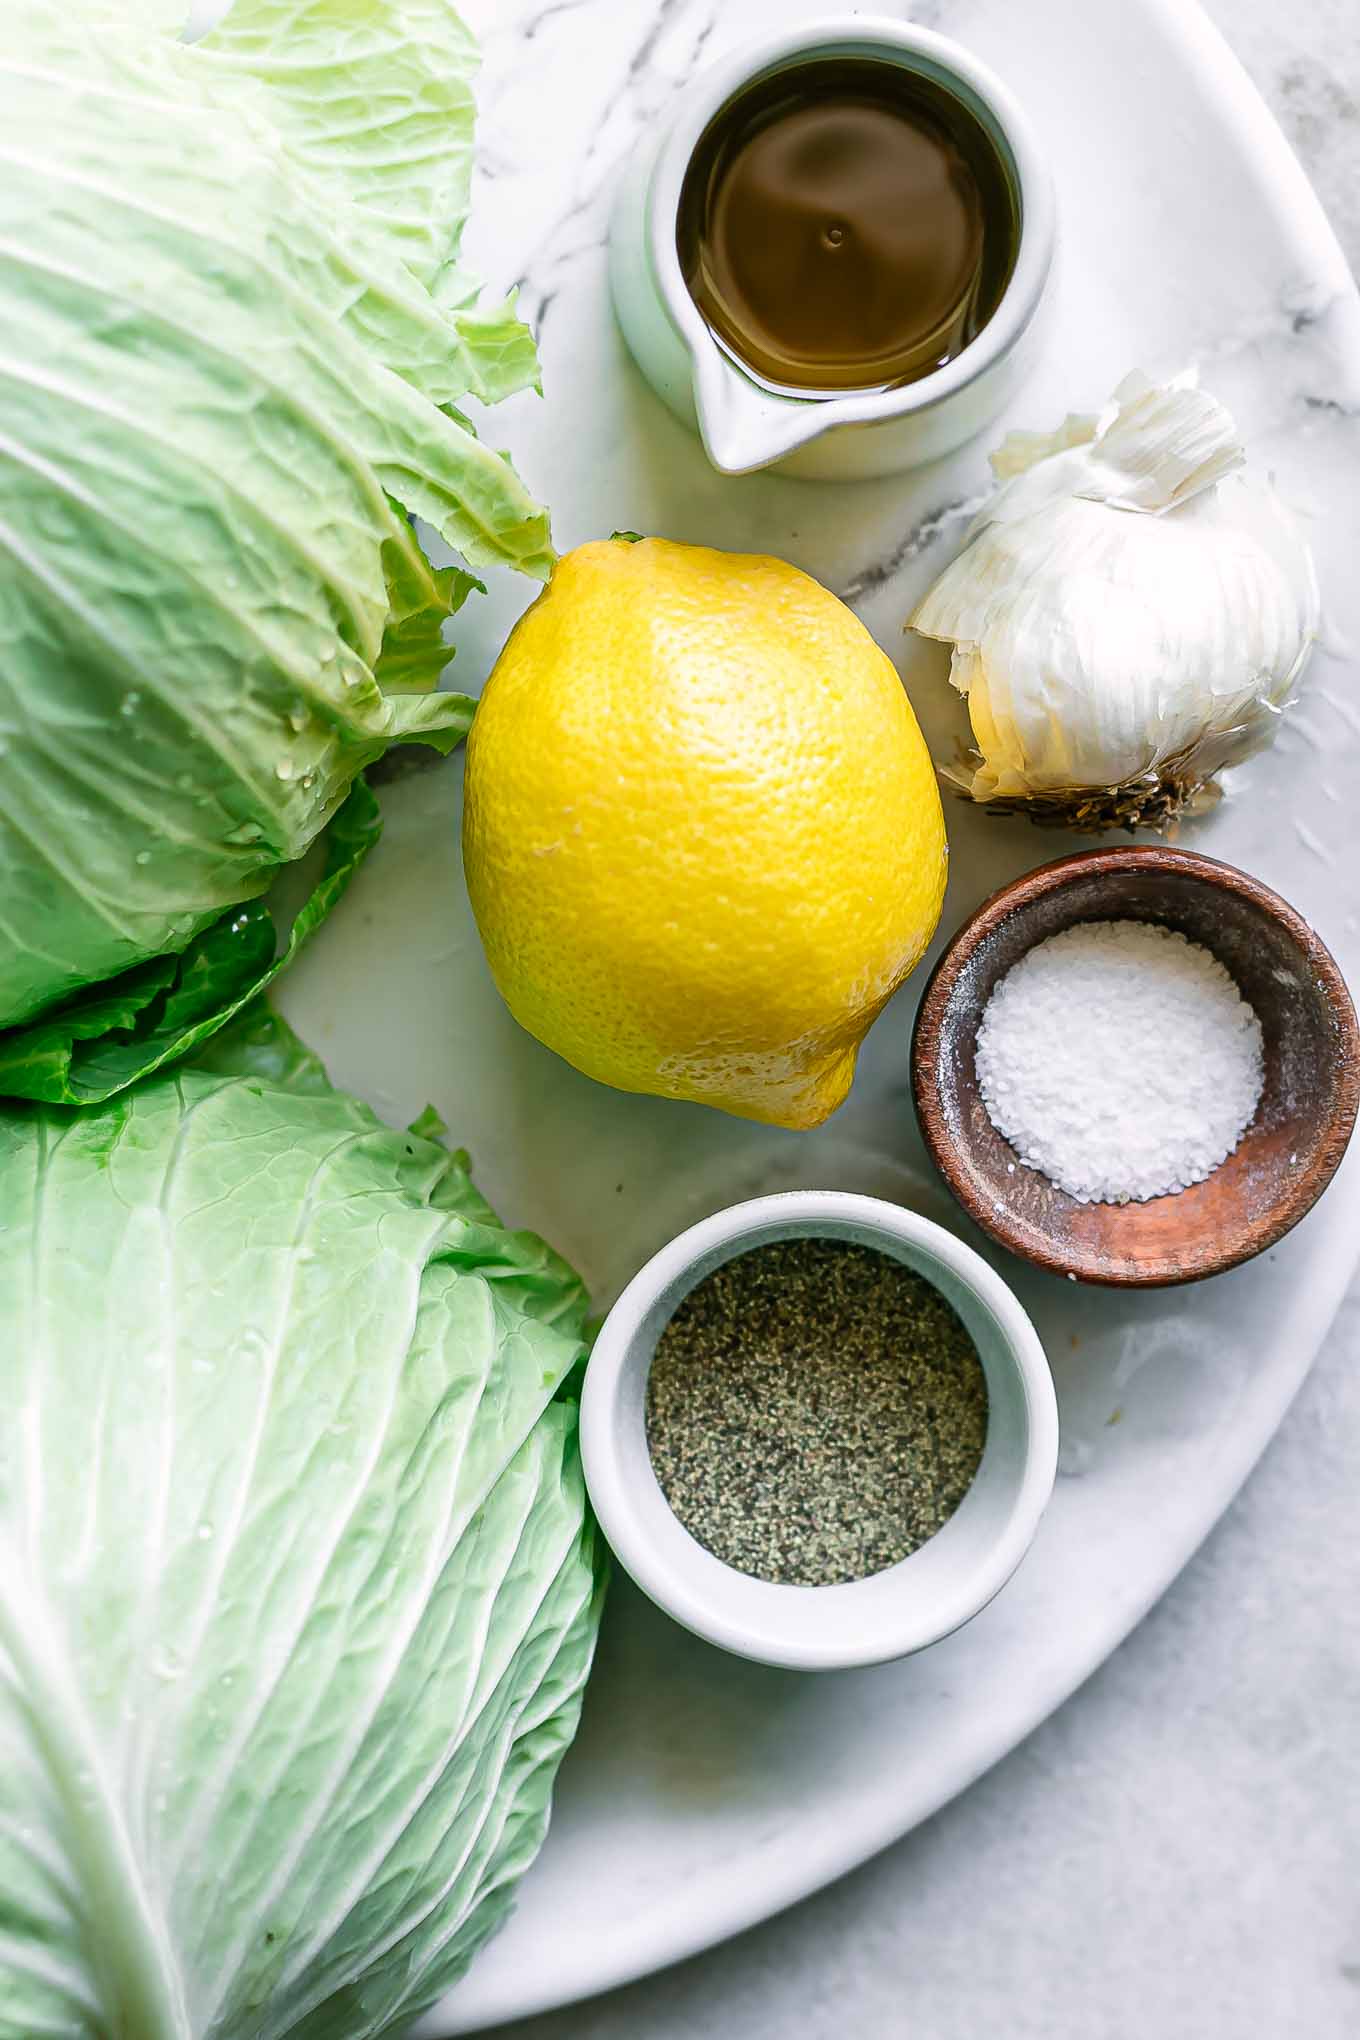 cabbage heads, lemon, olive oil, garlic, salt, and pepper on a table for baking cabbage crisps